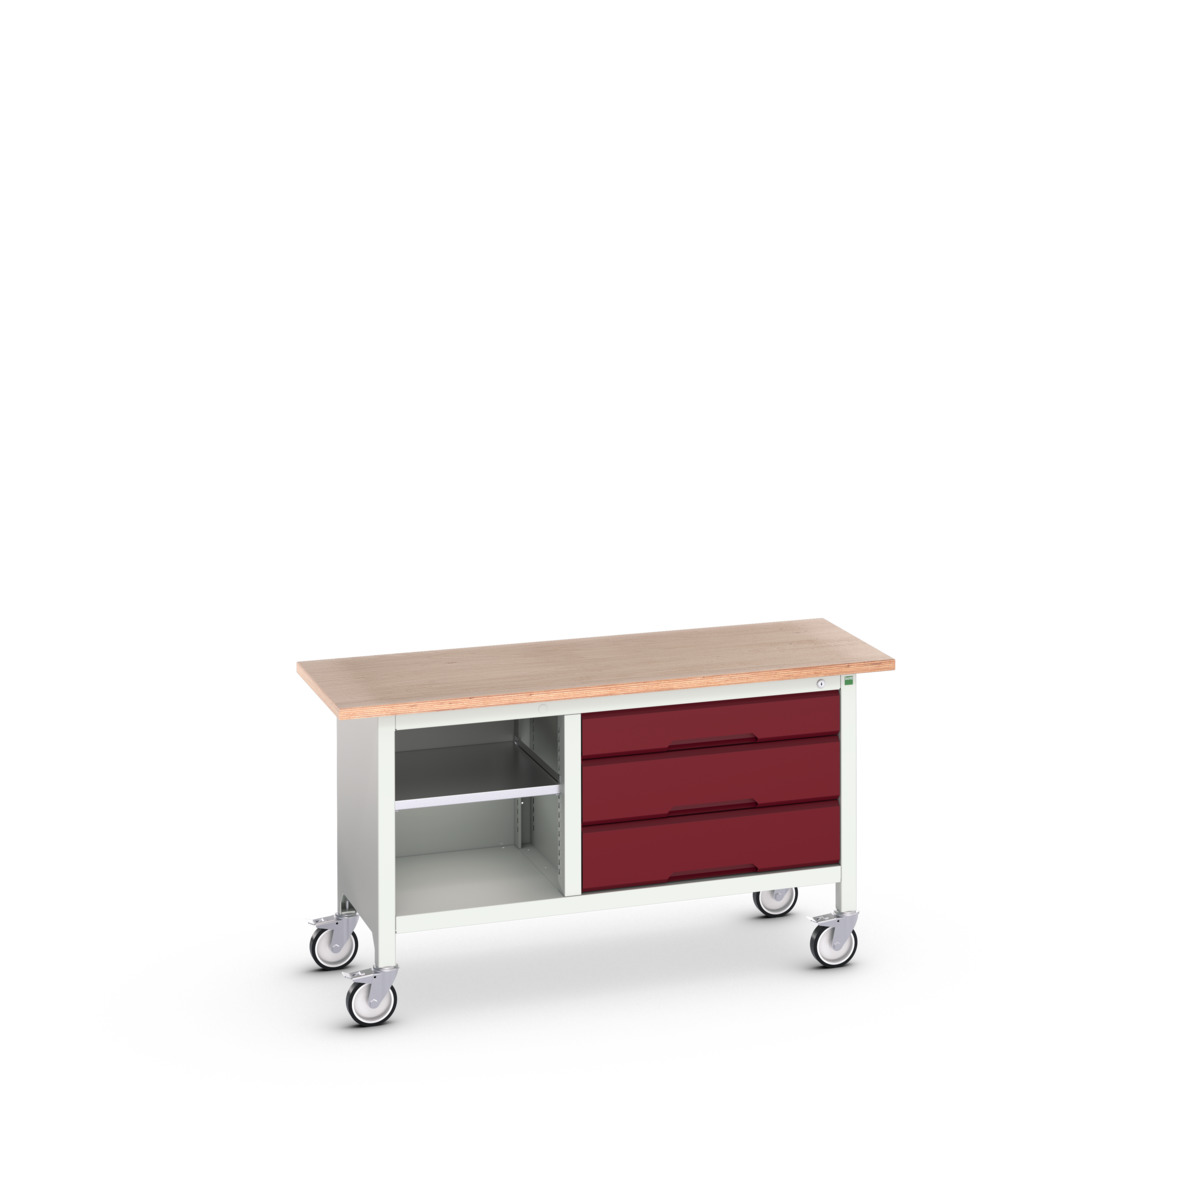 16923213.24 - verso mobile storage bench (mpx)